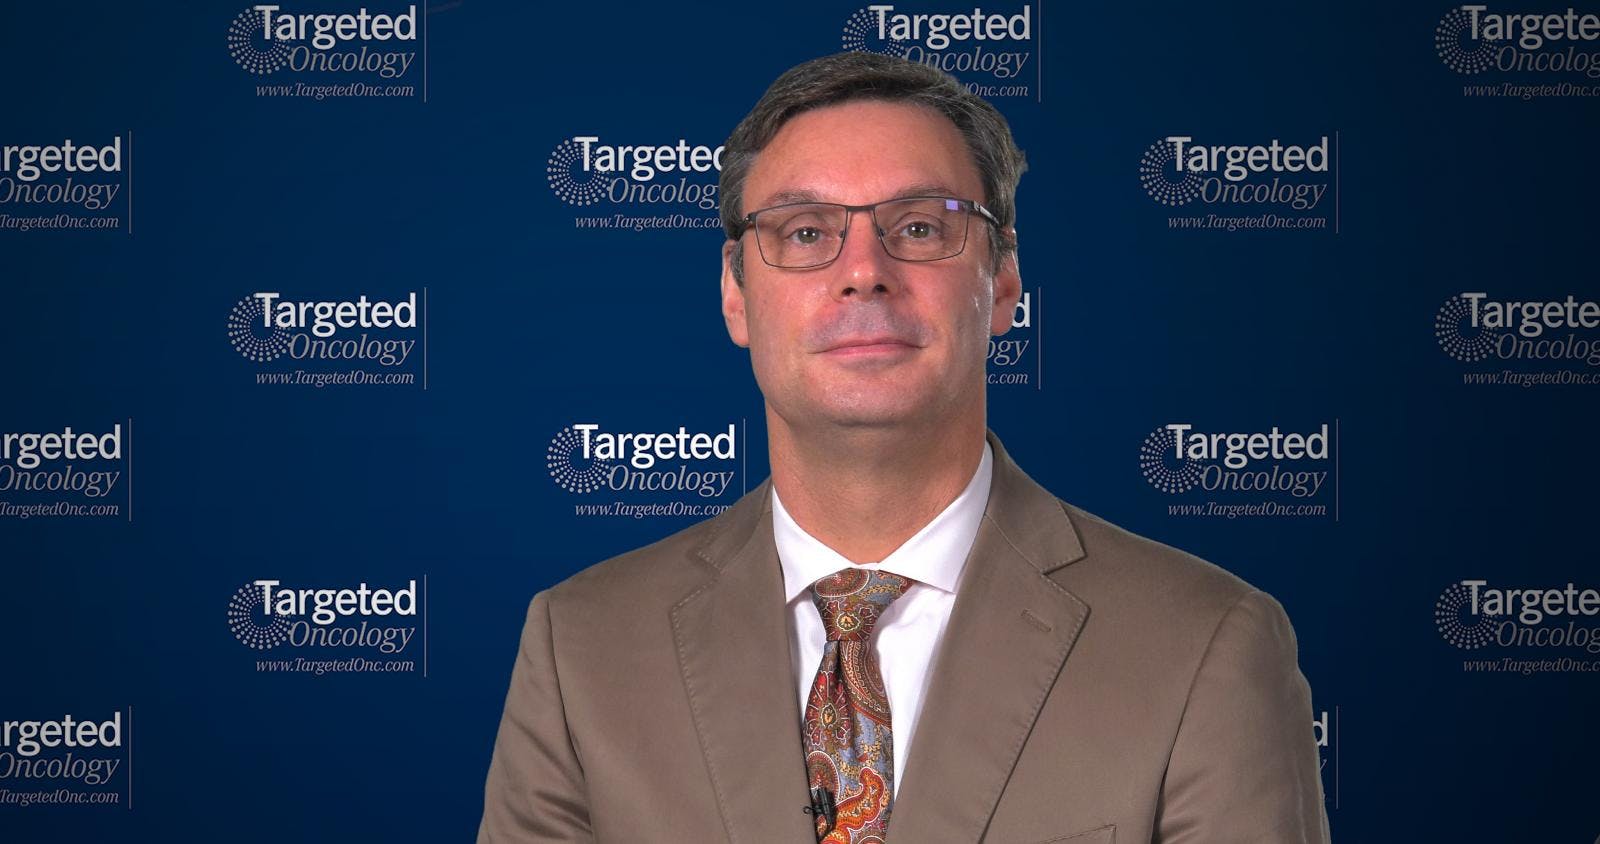 Treatment Recommendations Upon Metastasis in CRPC